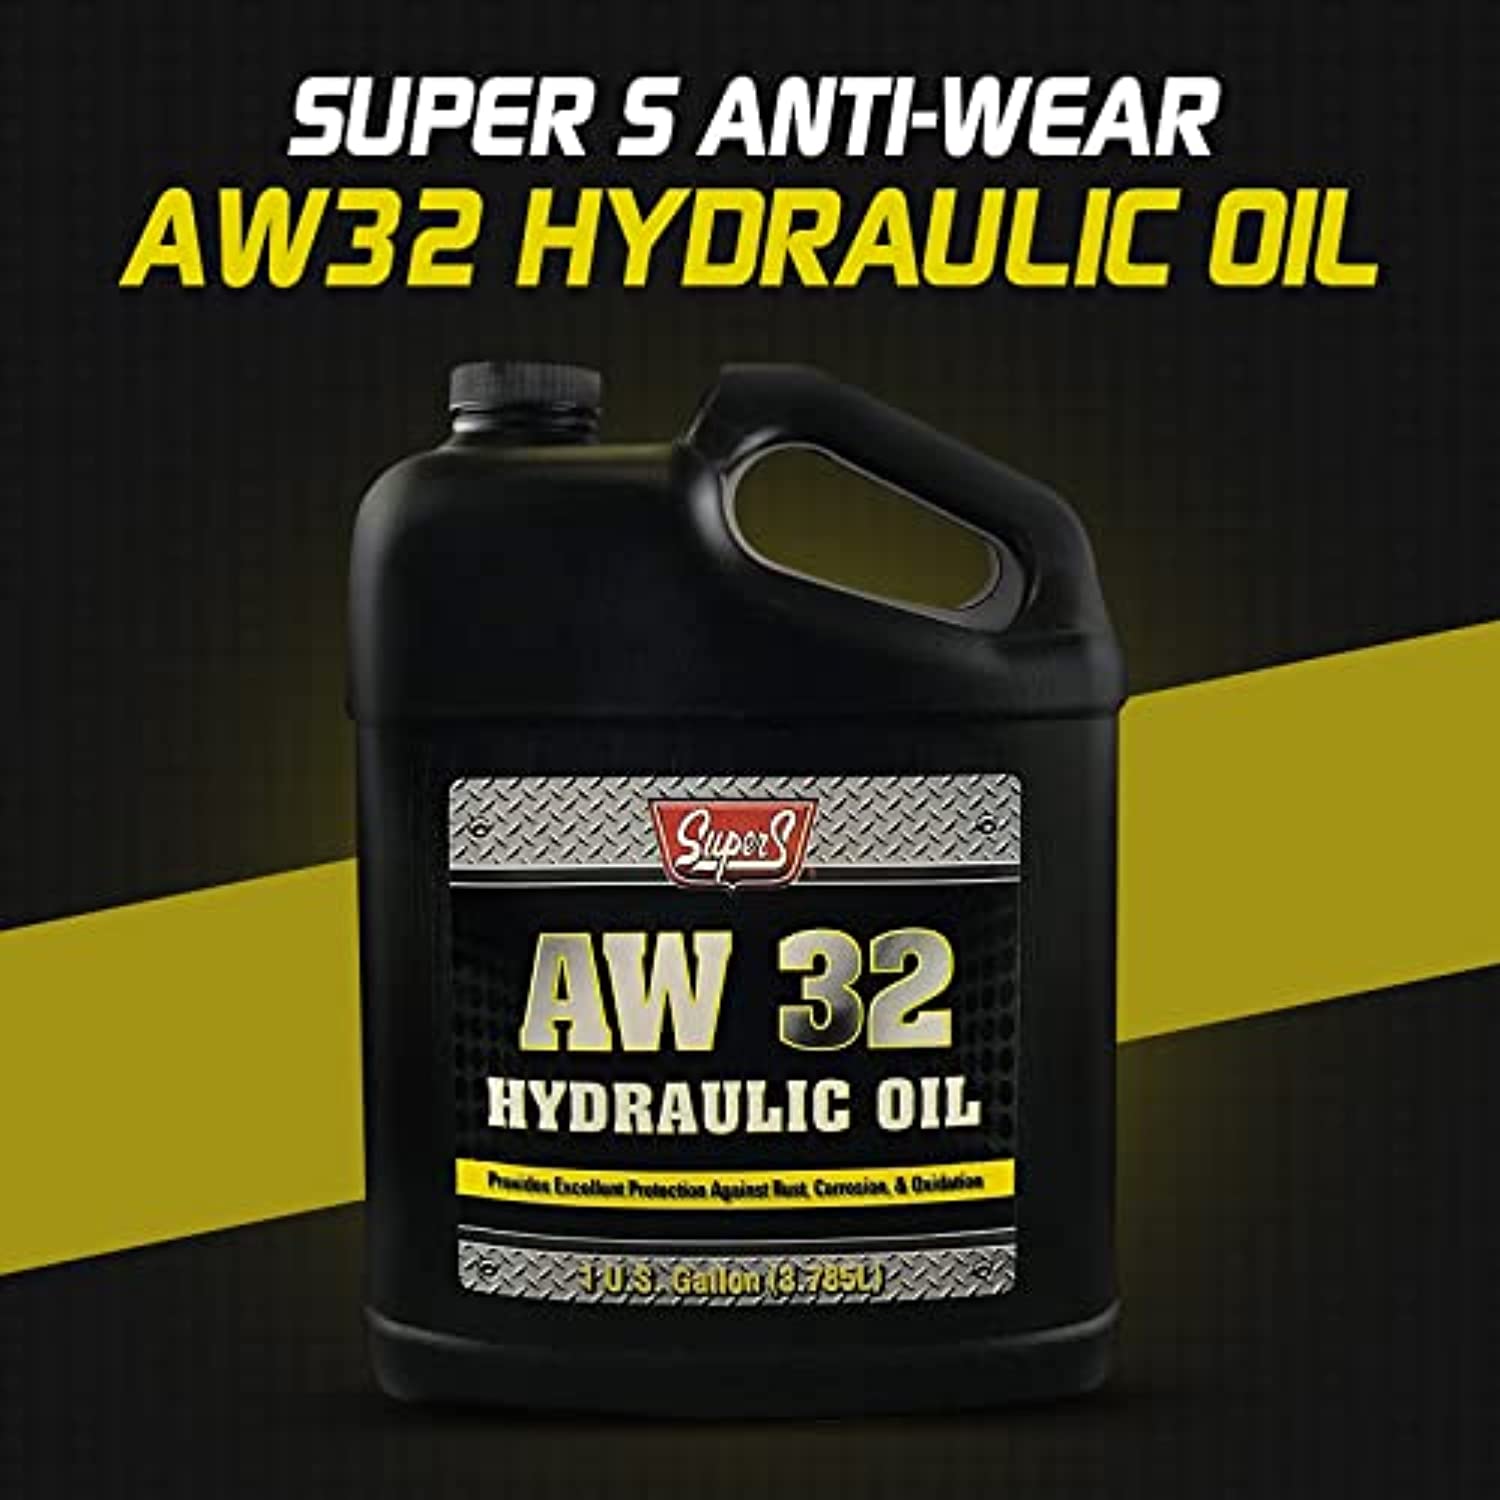 Super S Engine Protector AW32 Hydraulic Oil, Long Lasting gears & Compressor oil for log wood splitter, protect from Rust & Corrosion Available with Premium Quality Centaurus AZ Expandable Funnel – 1 Gallon